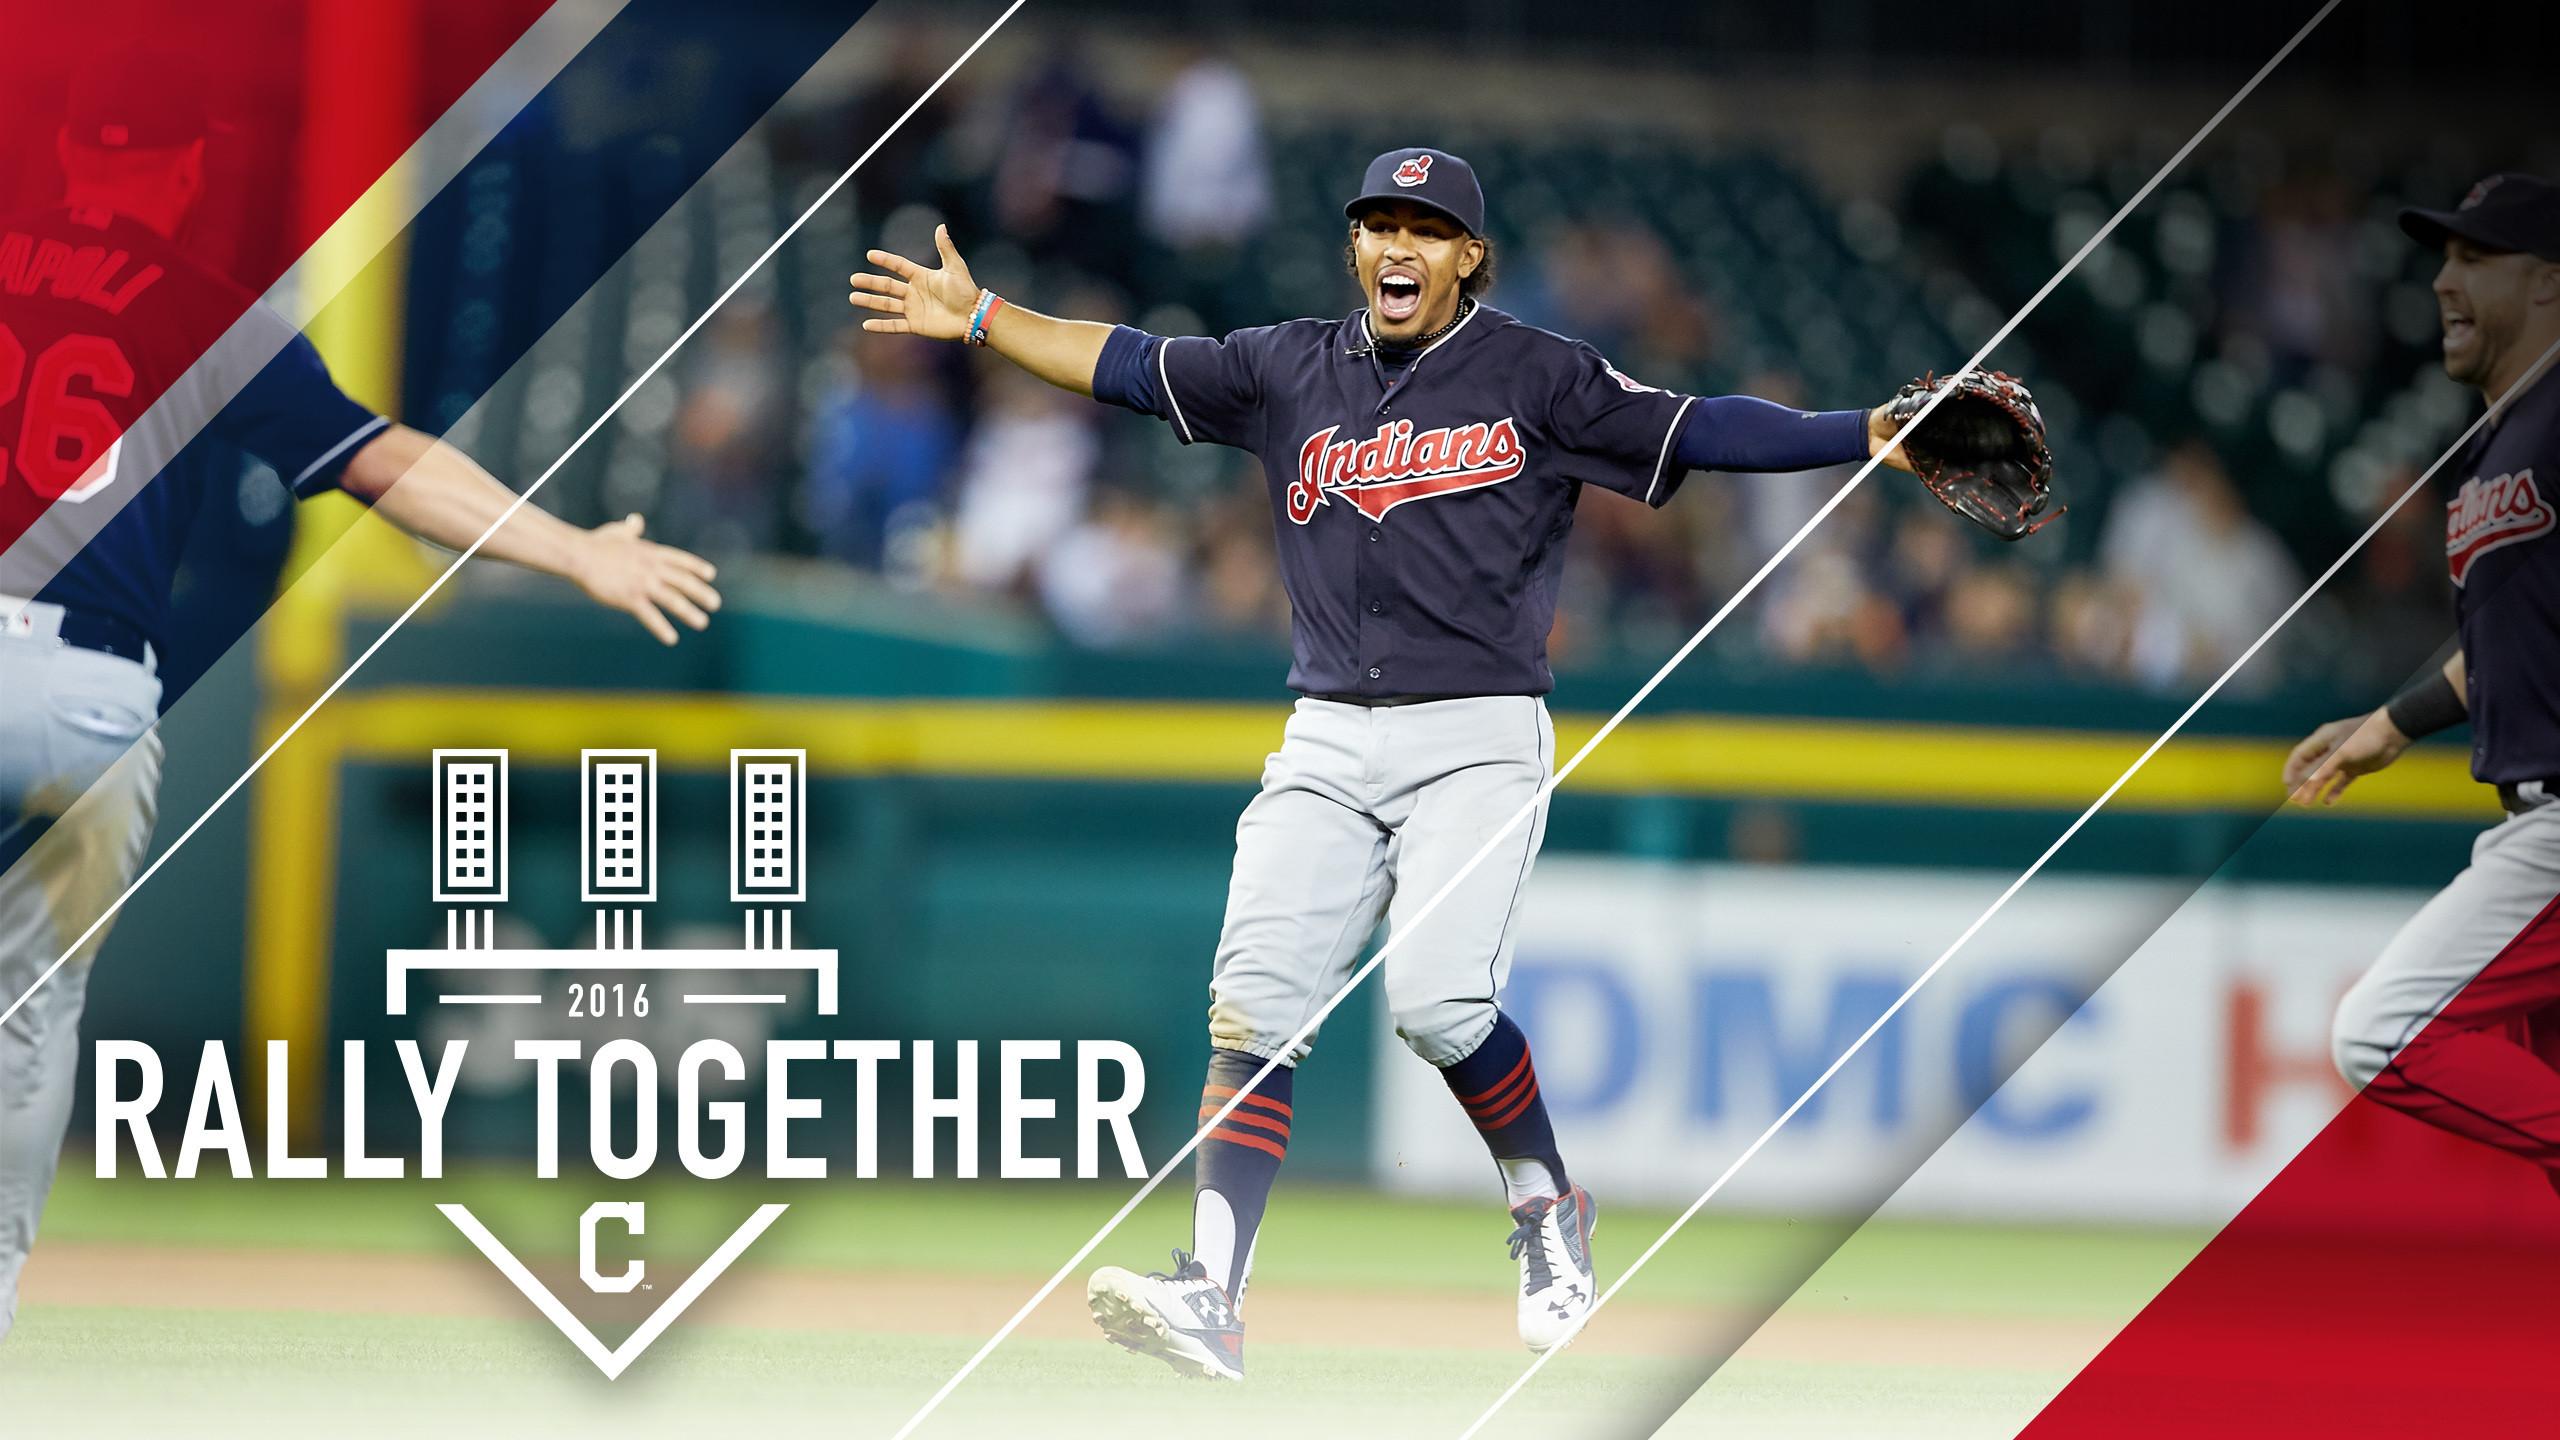 Cleveland Indians Wallpaper background picture